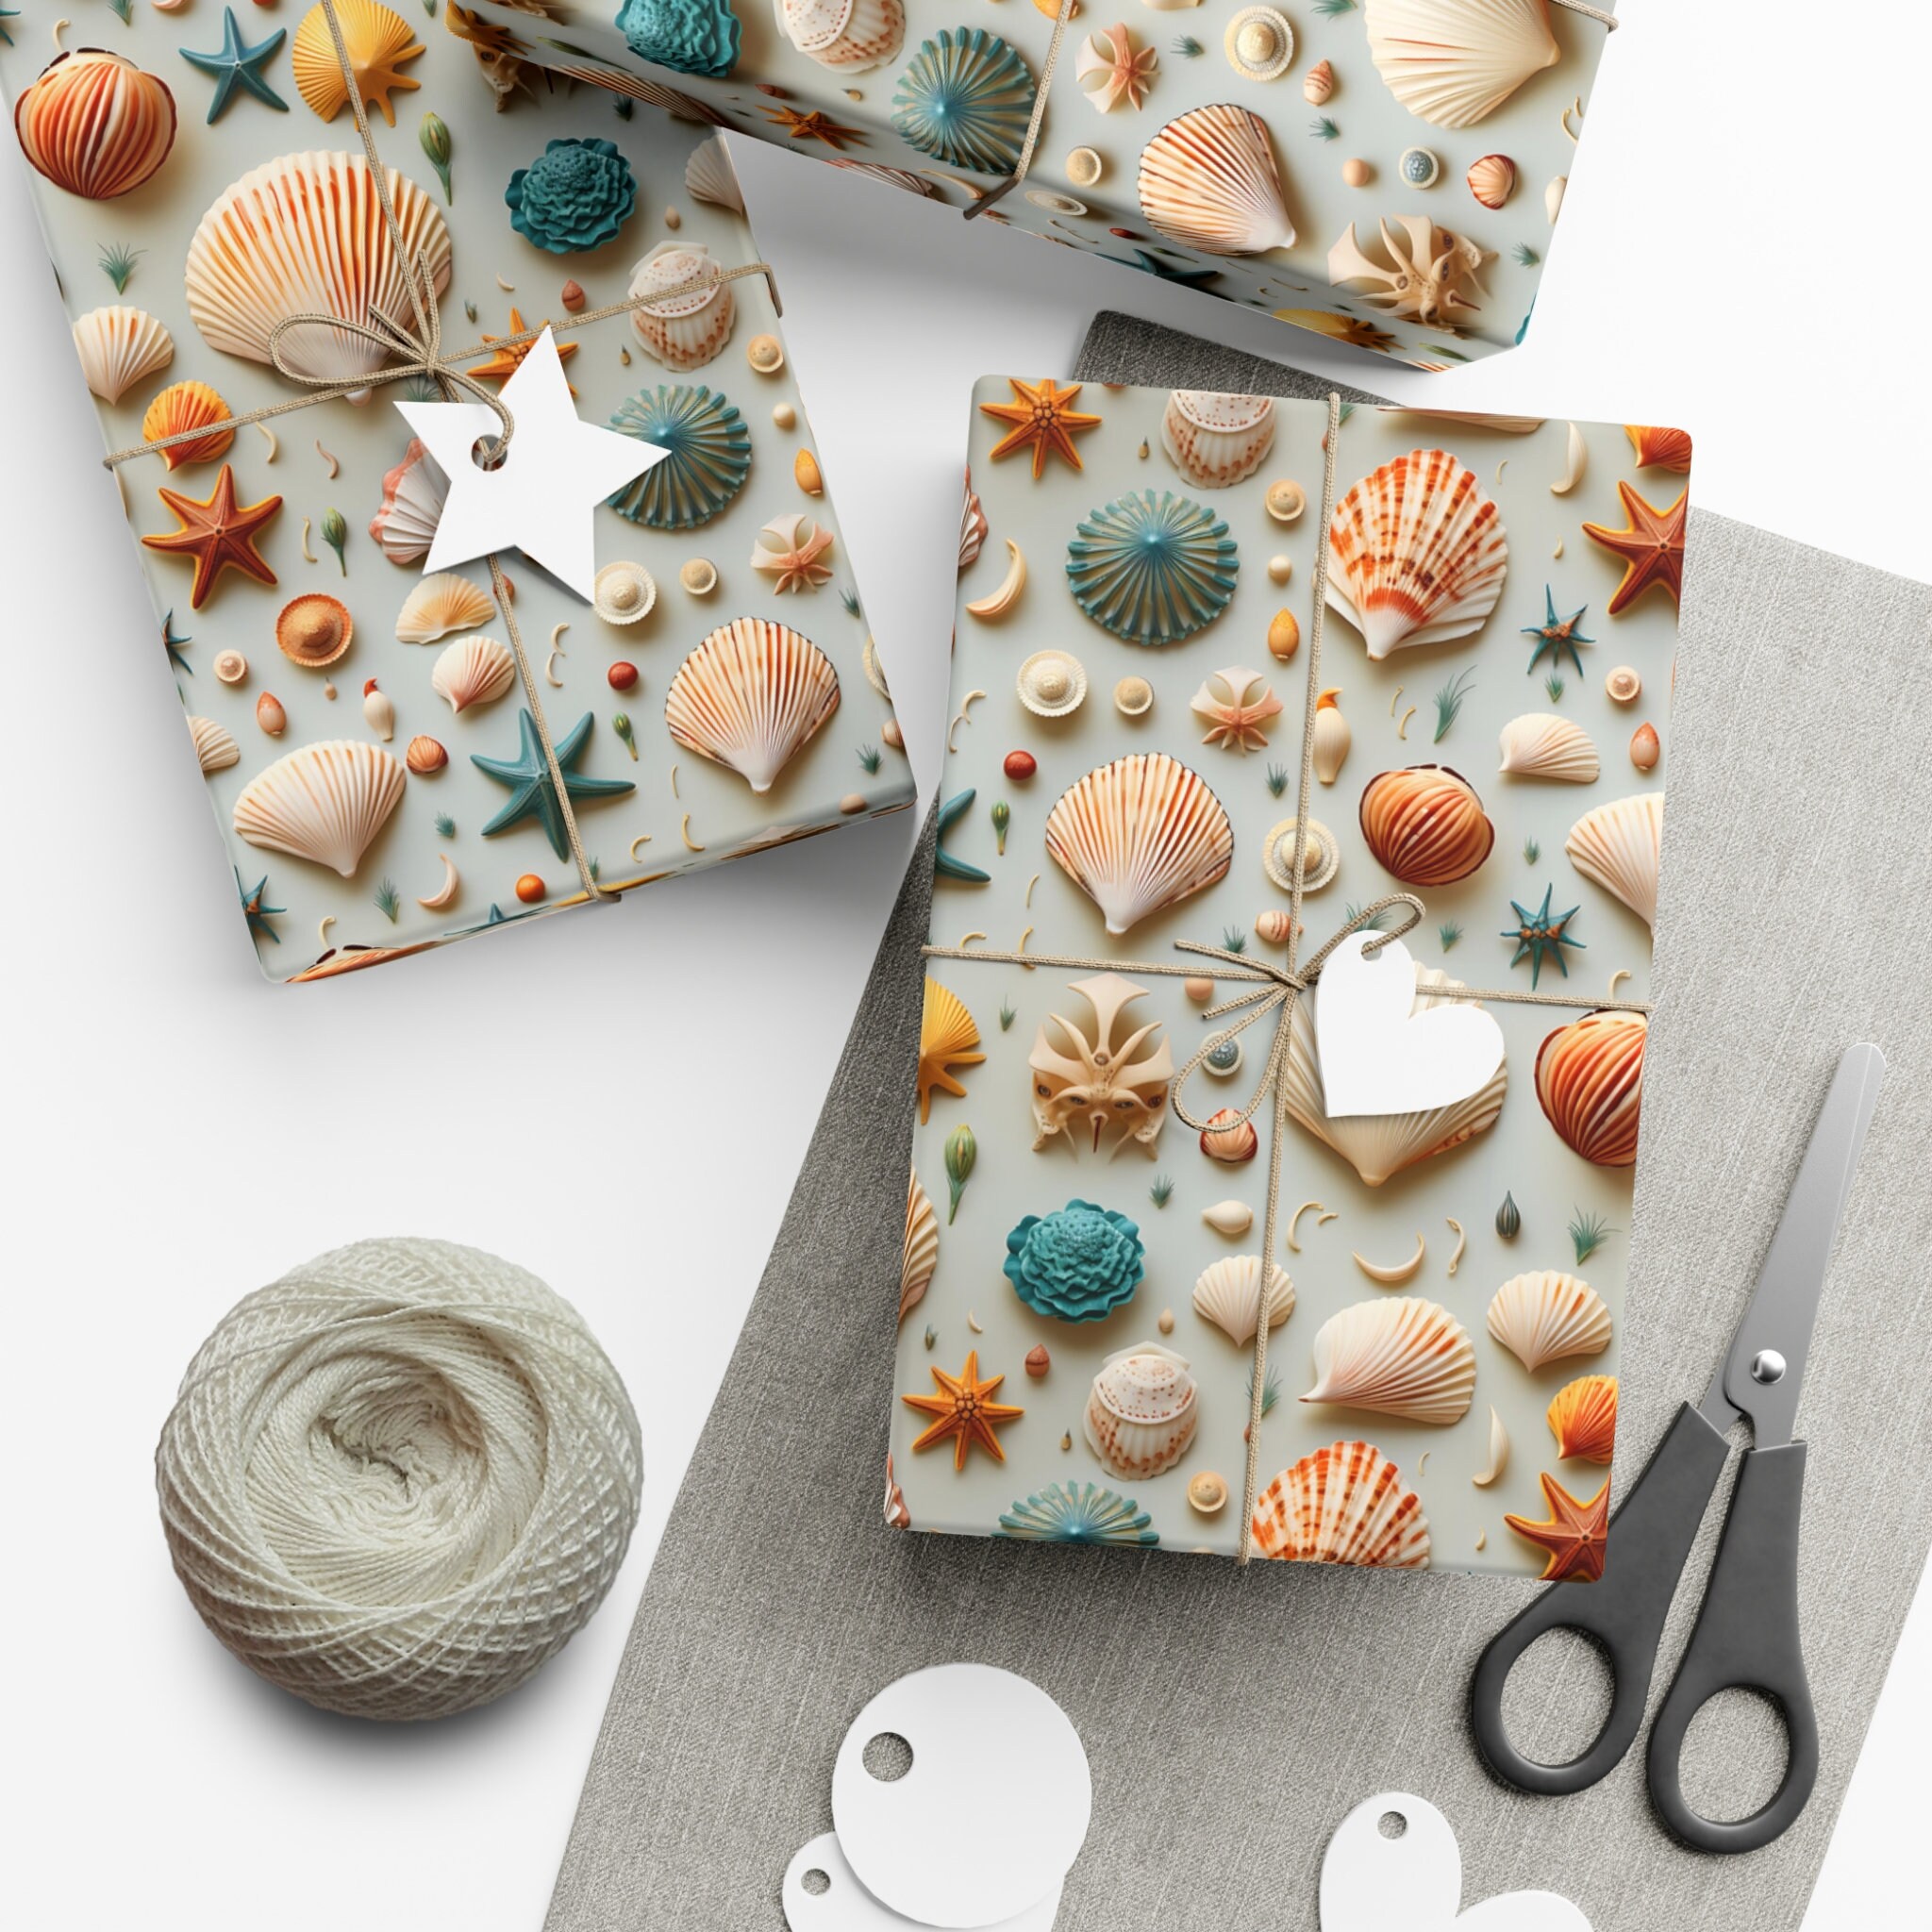 CUXWEOT Gift Wrapping Paper Beach Starfish Seashell for  Christmas,Birthday,Holiday,Wedding,Gifts Packing - 3Rolls - 58 x 23inch Per  Roll